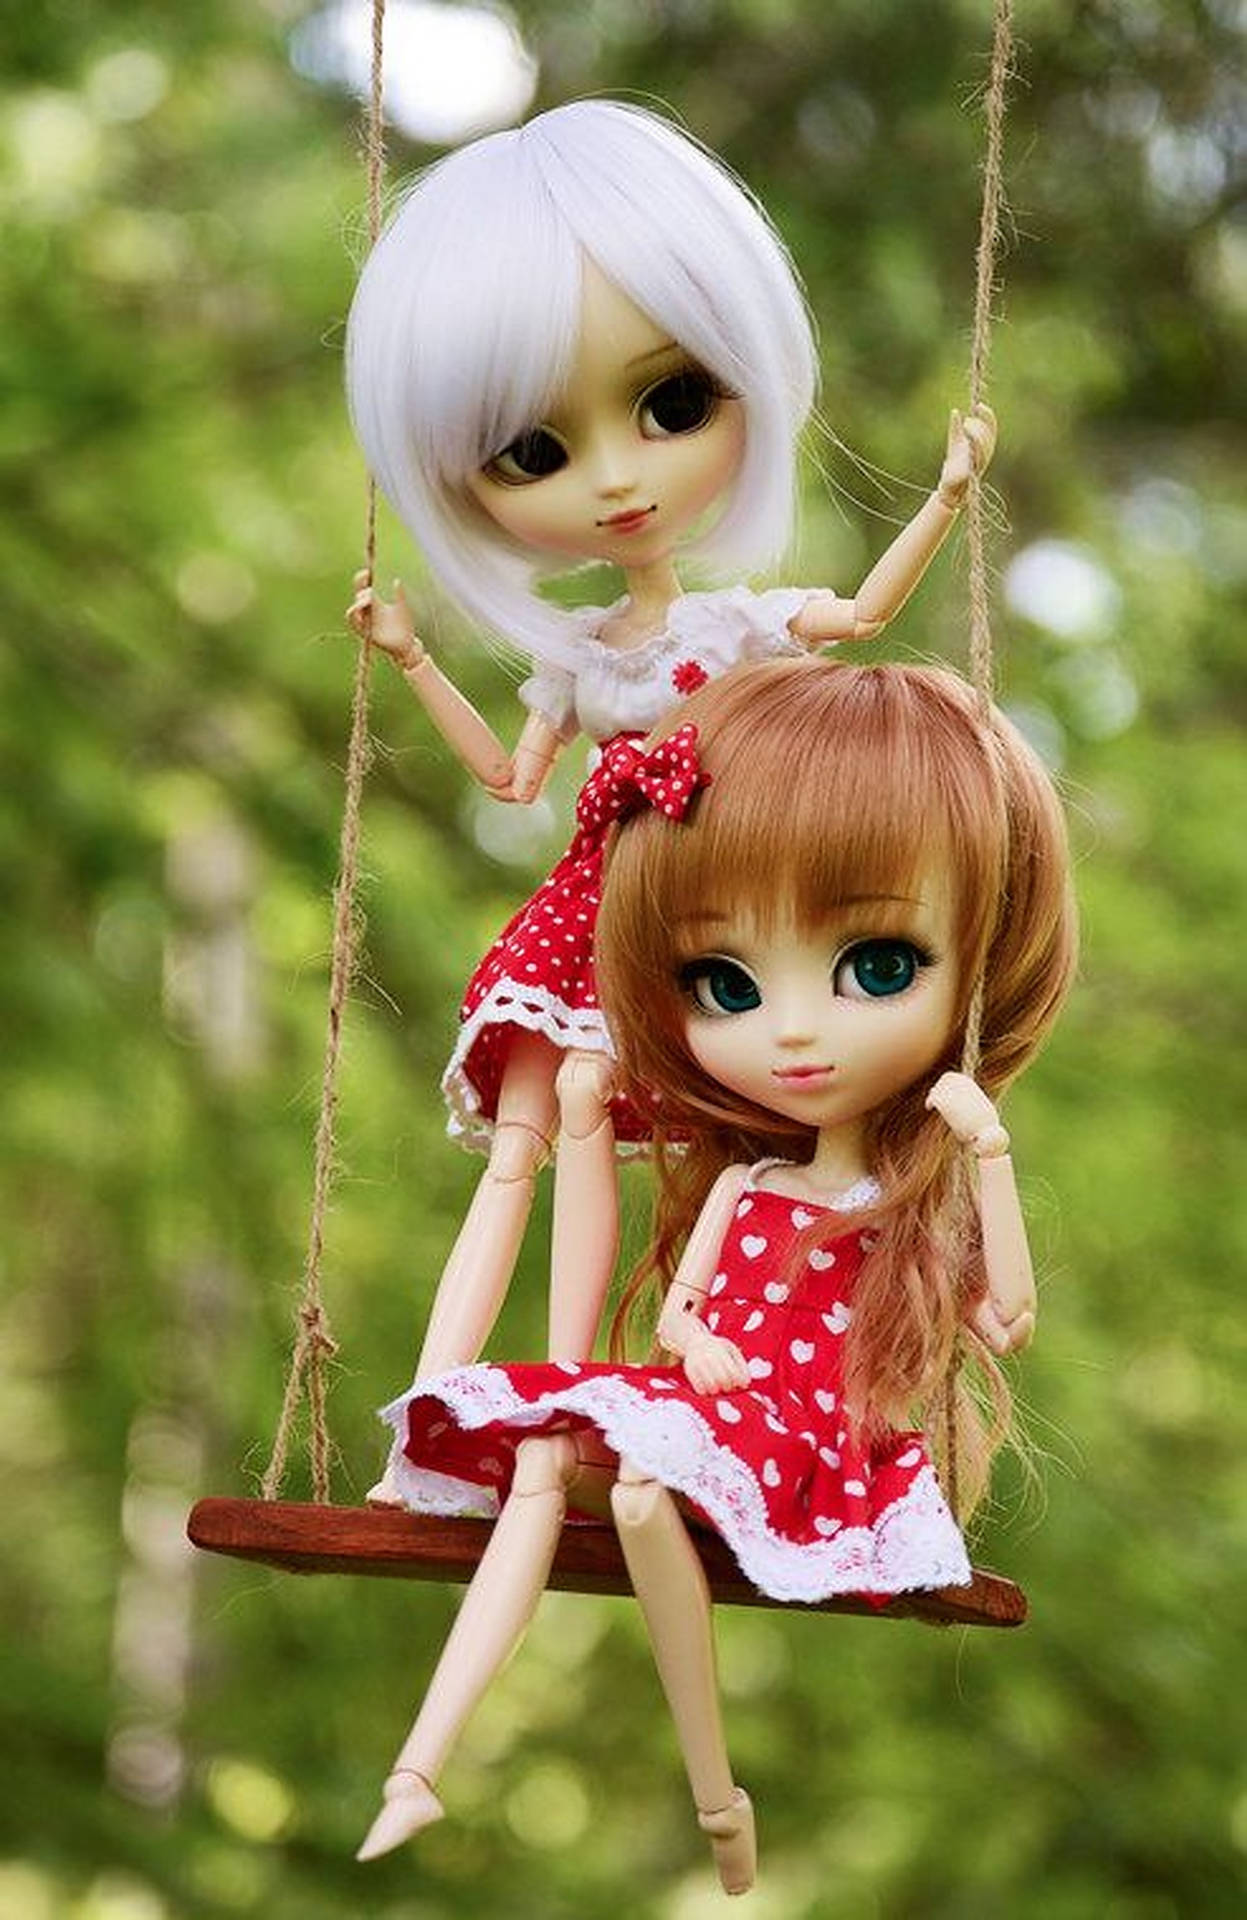 Dolls On A Swing Background